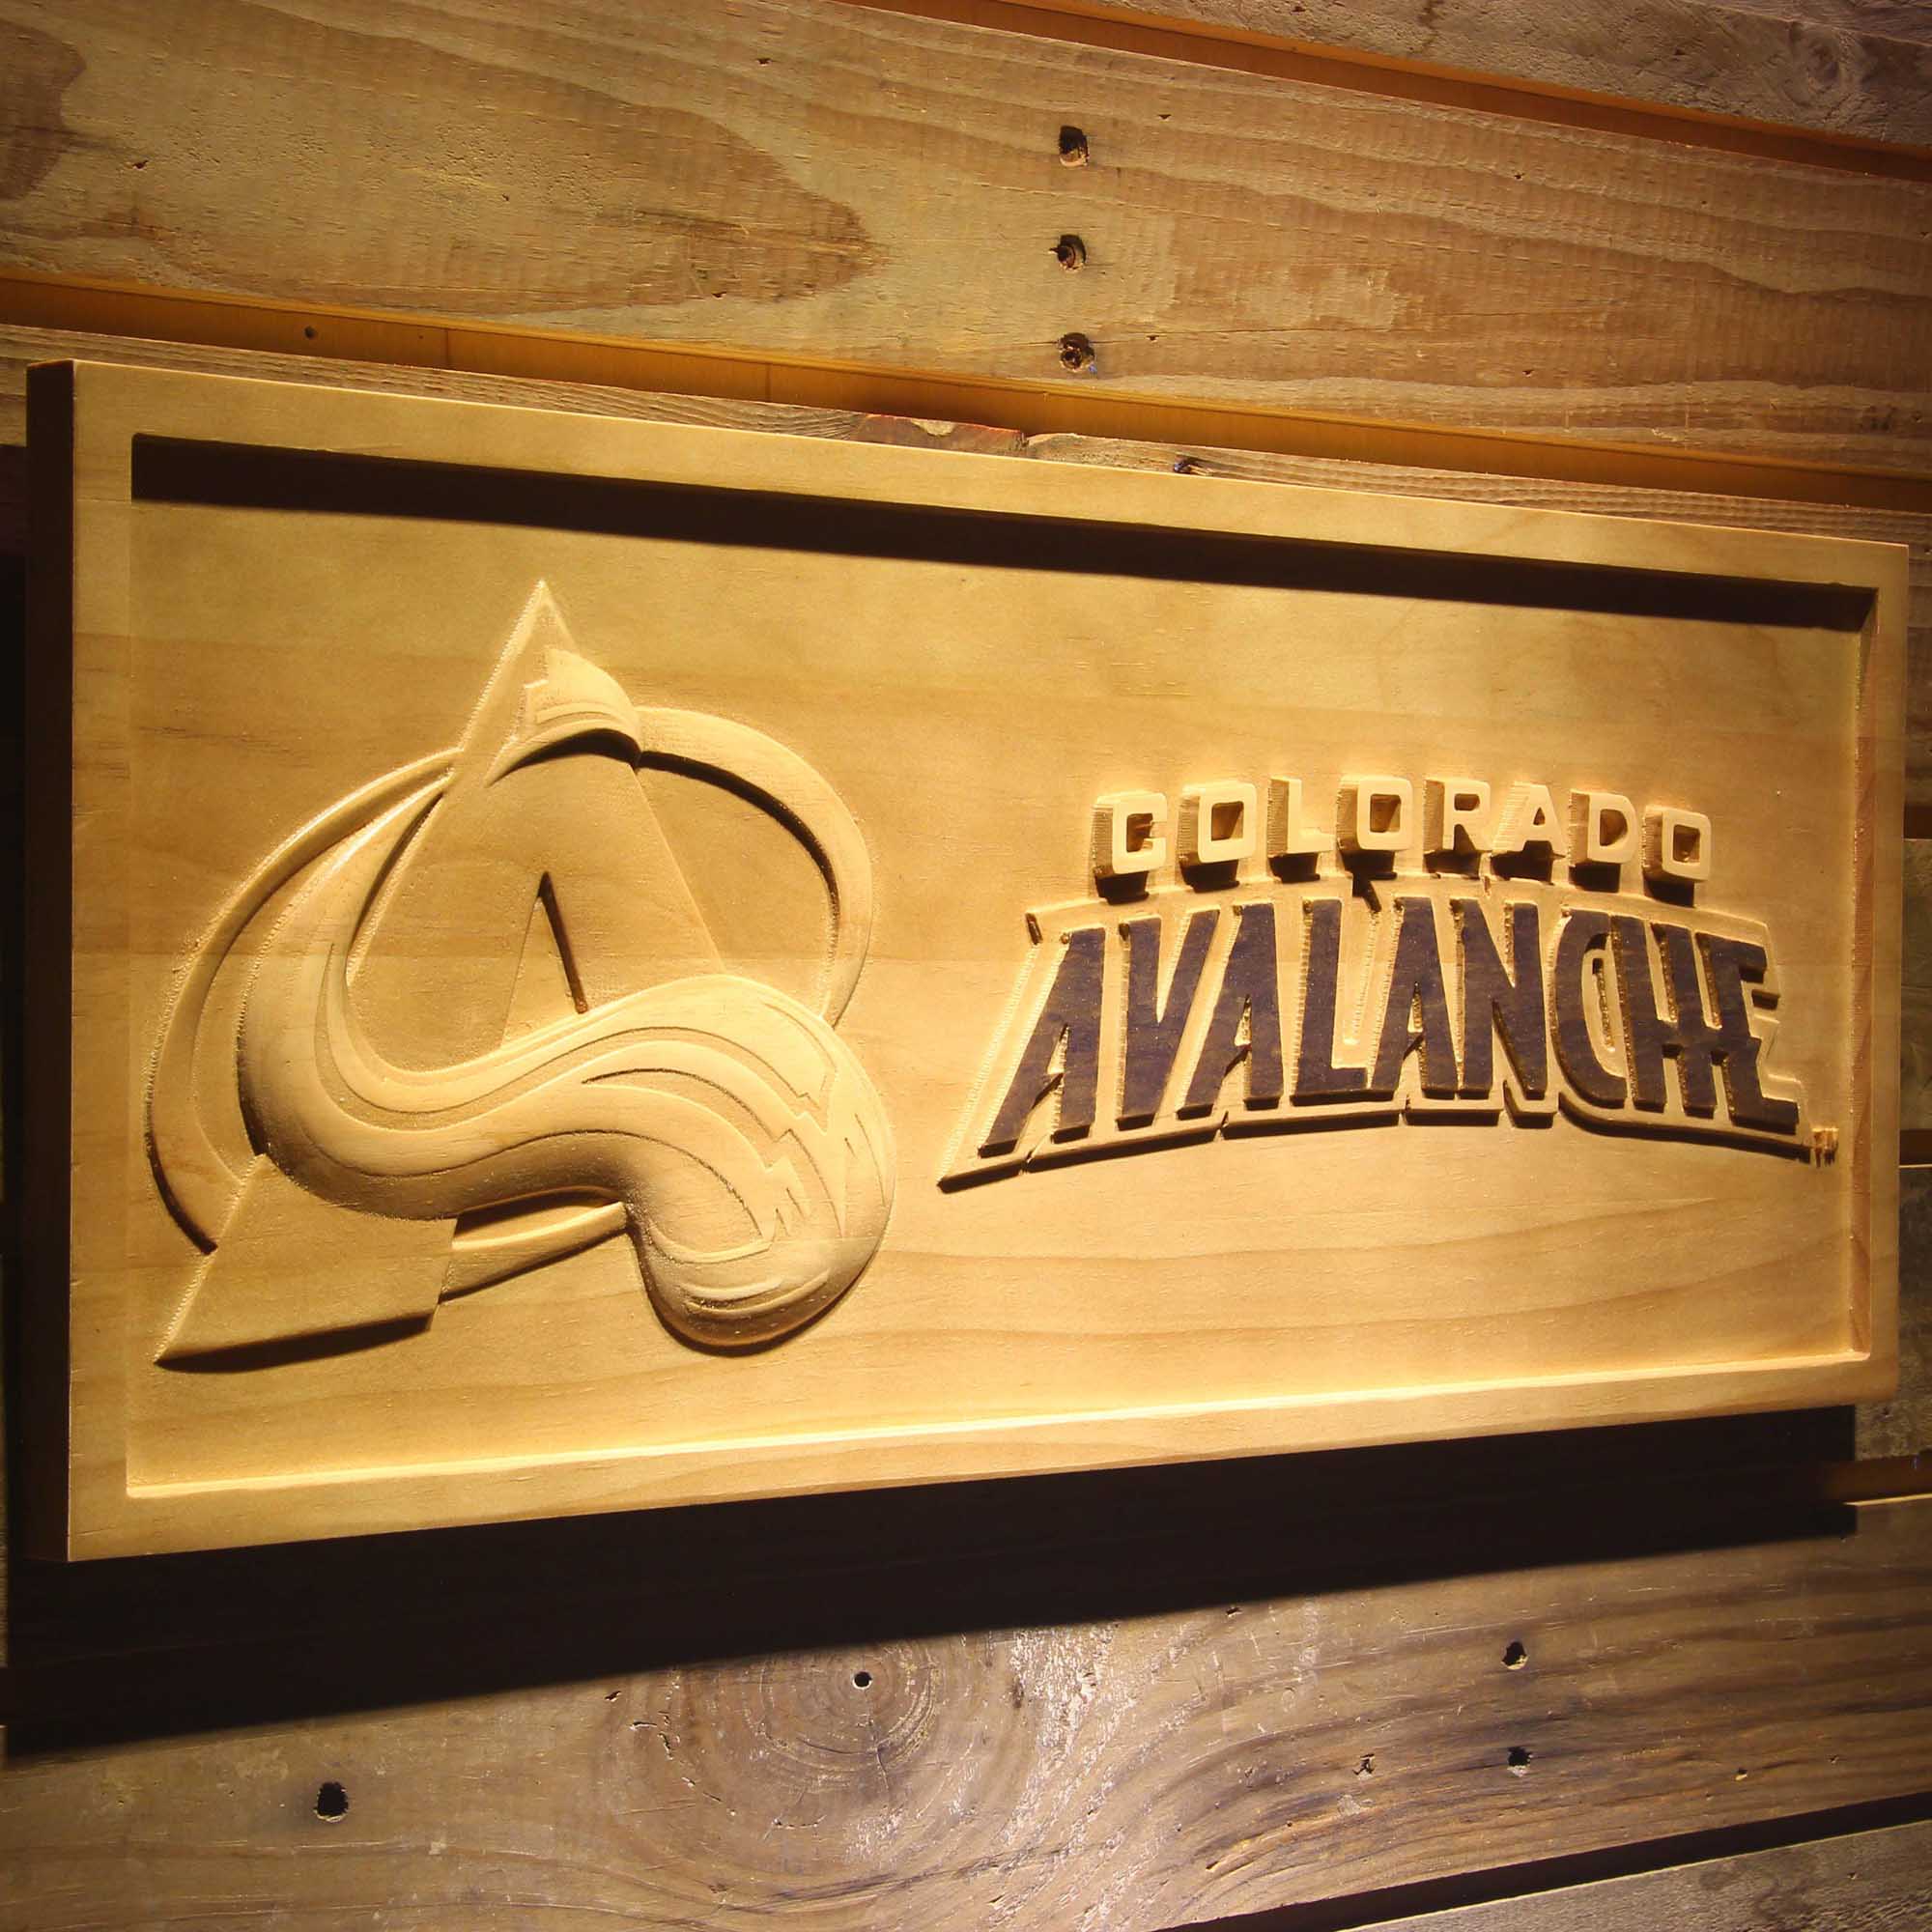 Colorado Avalanche 3D Solid Wooden Craving Sign